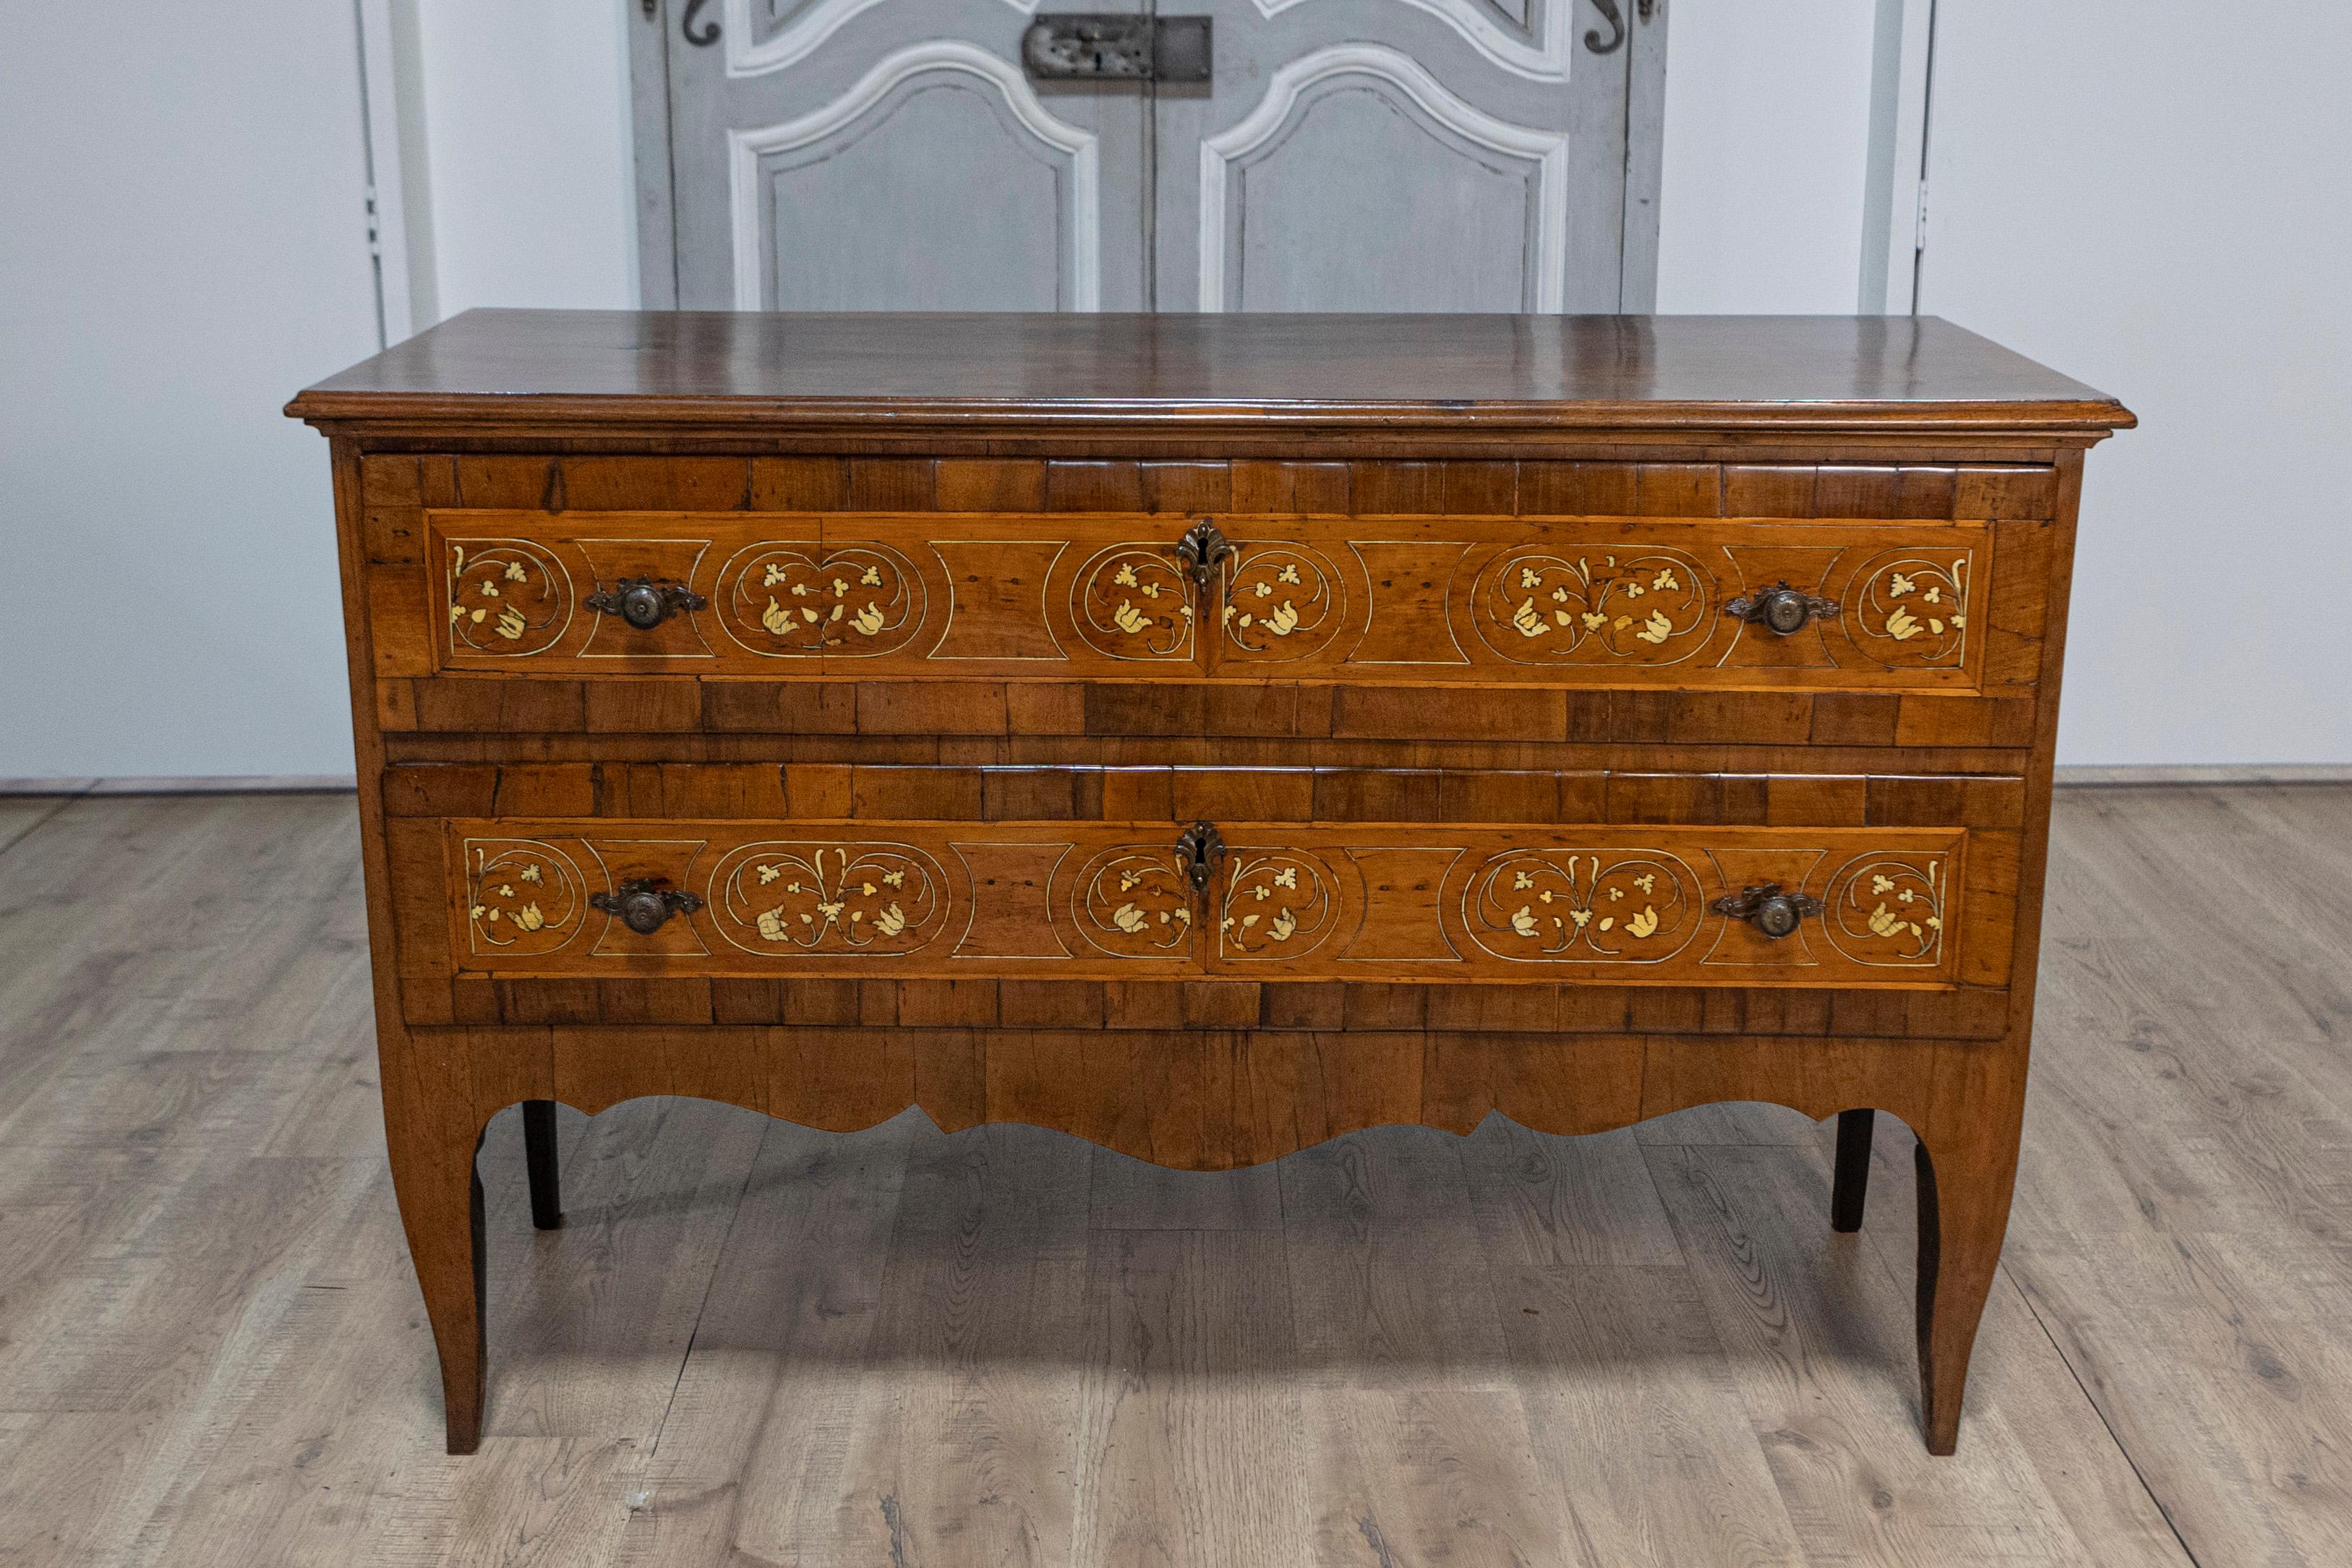 An Italian walnut, mahogany and ash commode from the 18th century with scrollwork marquetry, two drawers and scalloped apron. This exquisite Italian commode from the 18th century is a masterpiece of craftsmanship, featuring a harmonious blend of